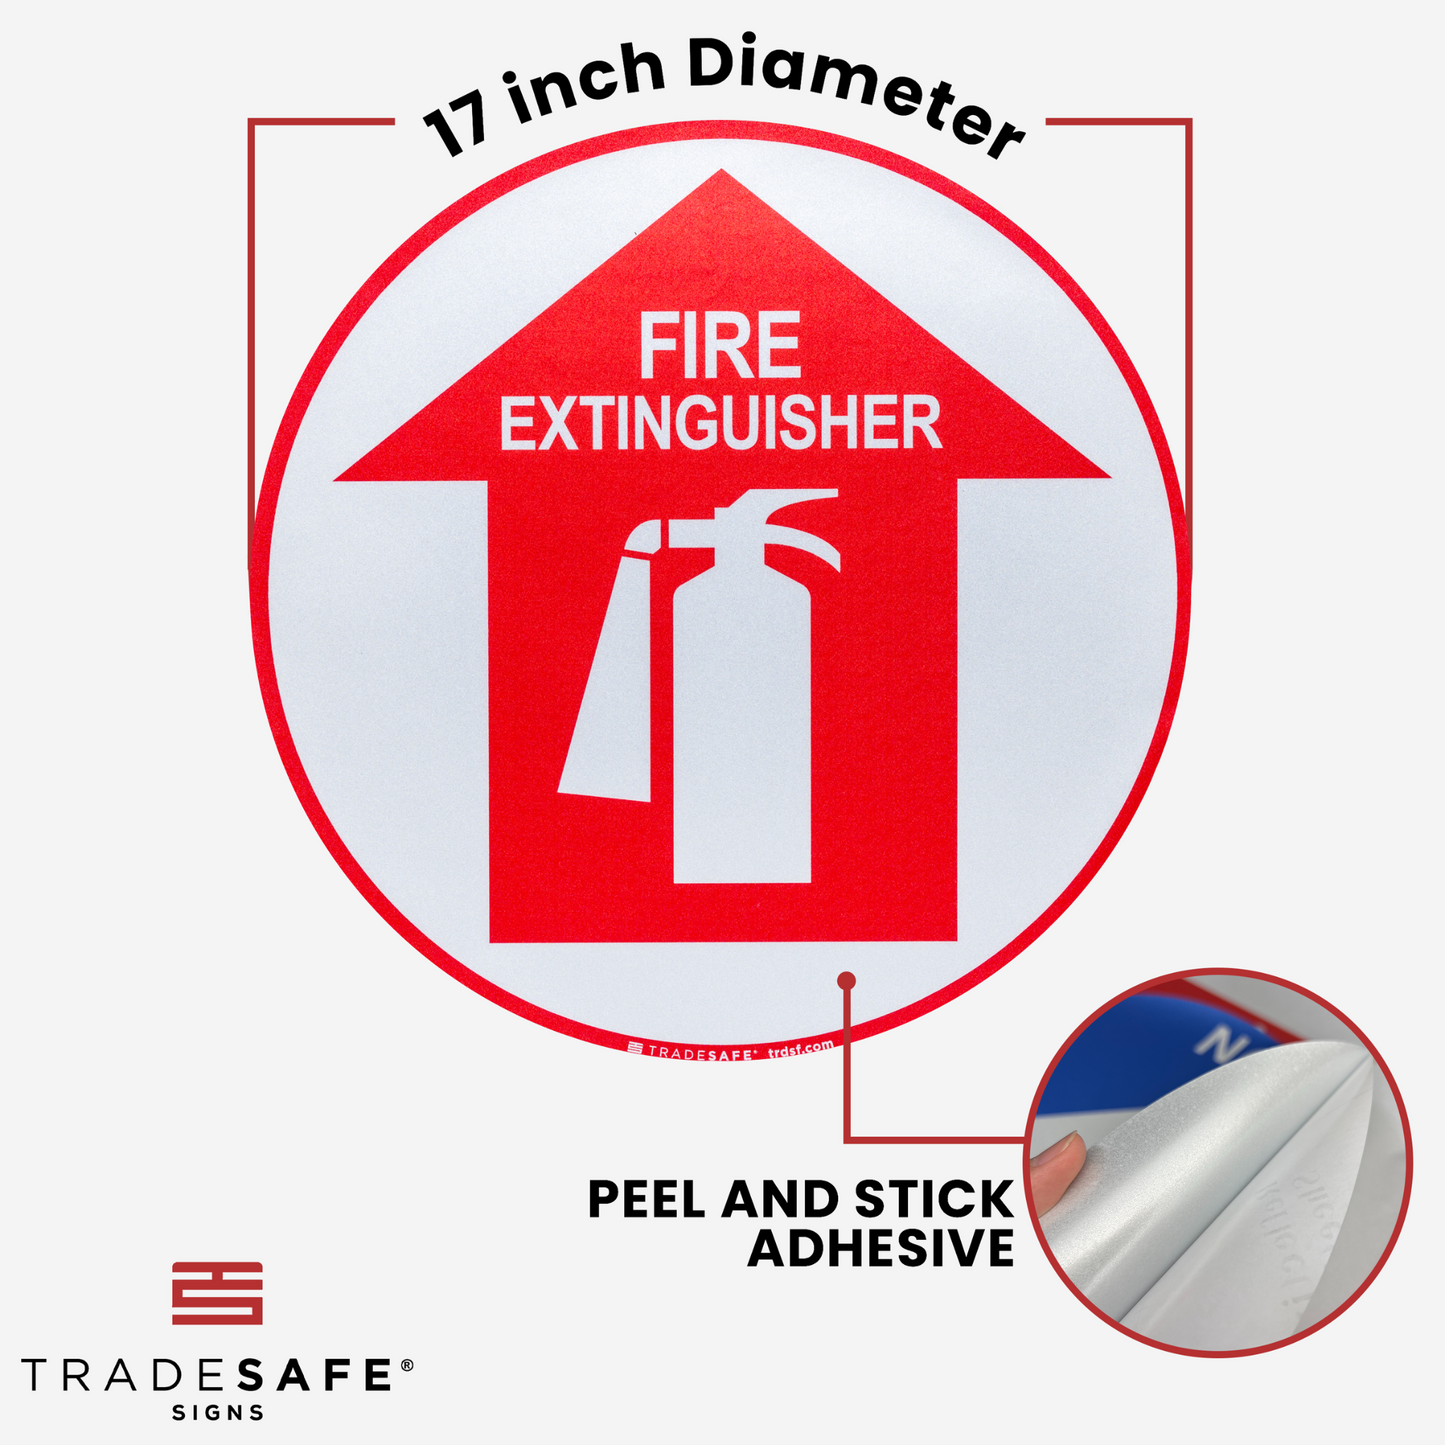 dimensions of fire extinguisher sign